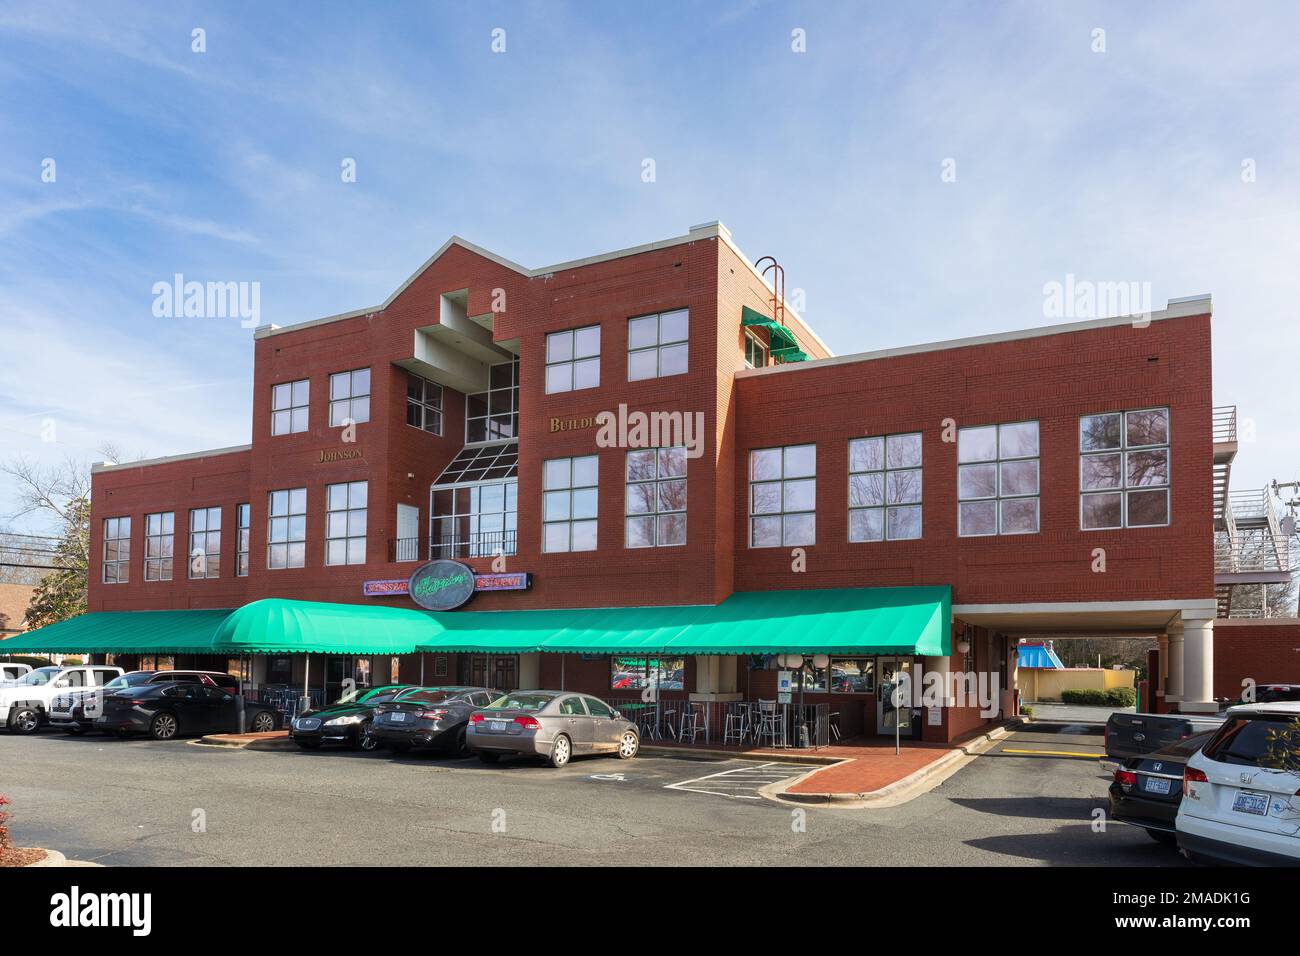 MATTHEWS, NC, USA-15 JANUARY 2023: Kristopher's Sports Bar and Restaurant, in the Johnson Building on Trade Street.  Building, sign and parking lot. Stock Photo